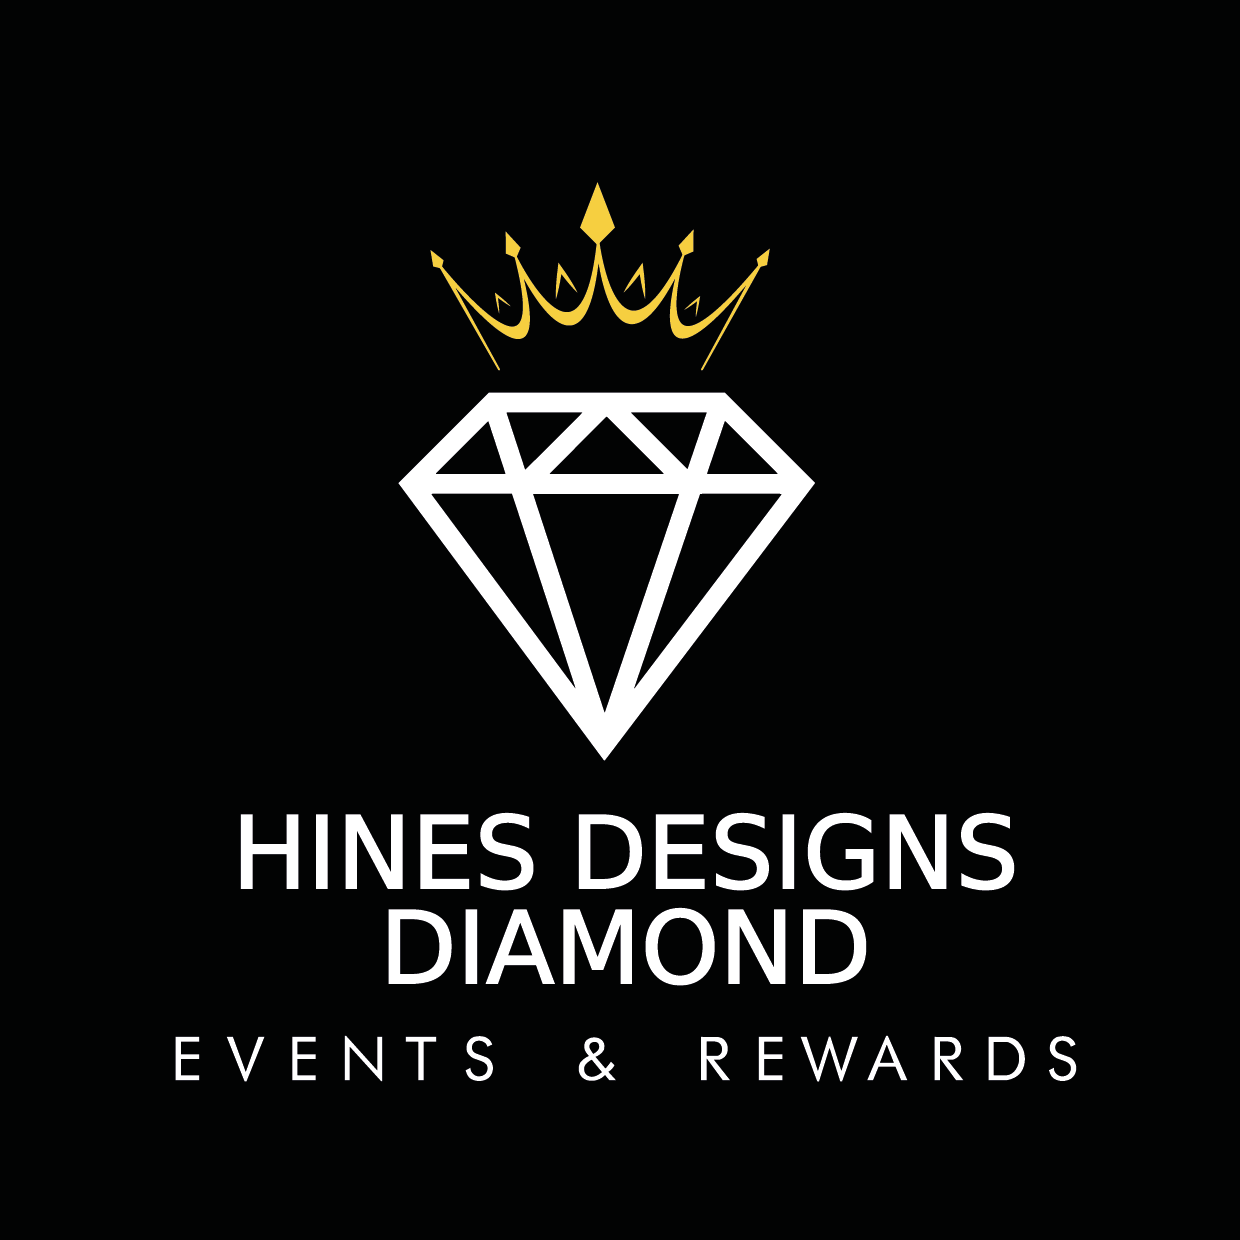 About Us - Hines Designs